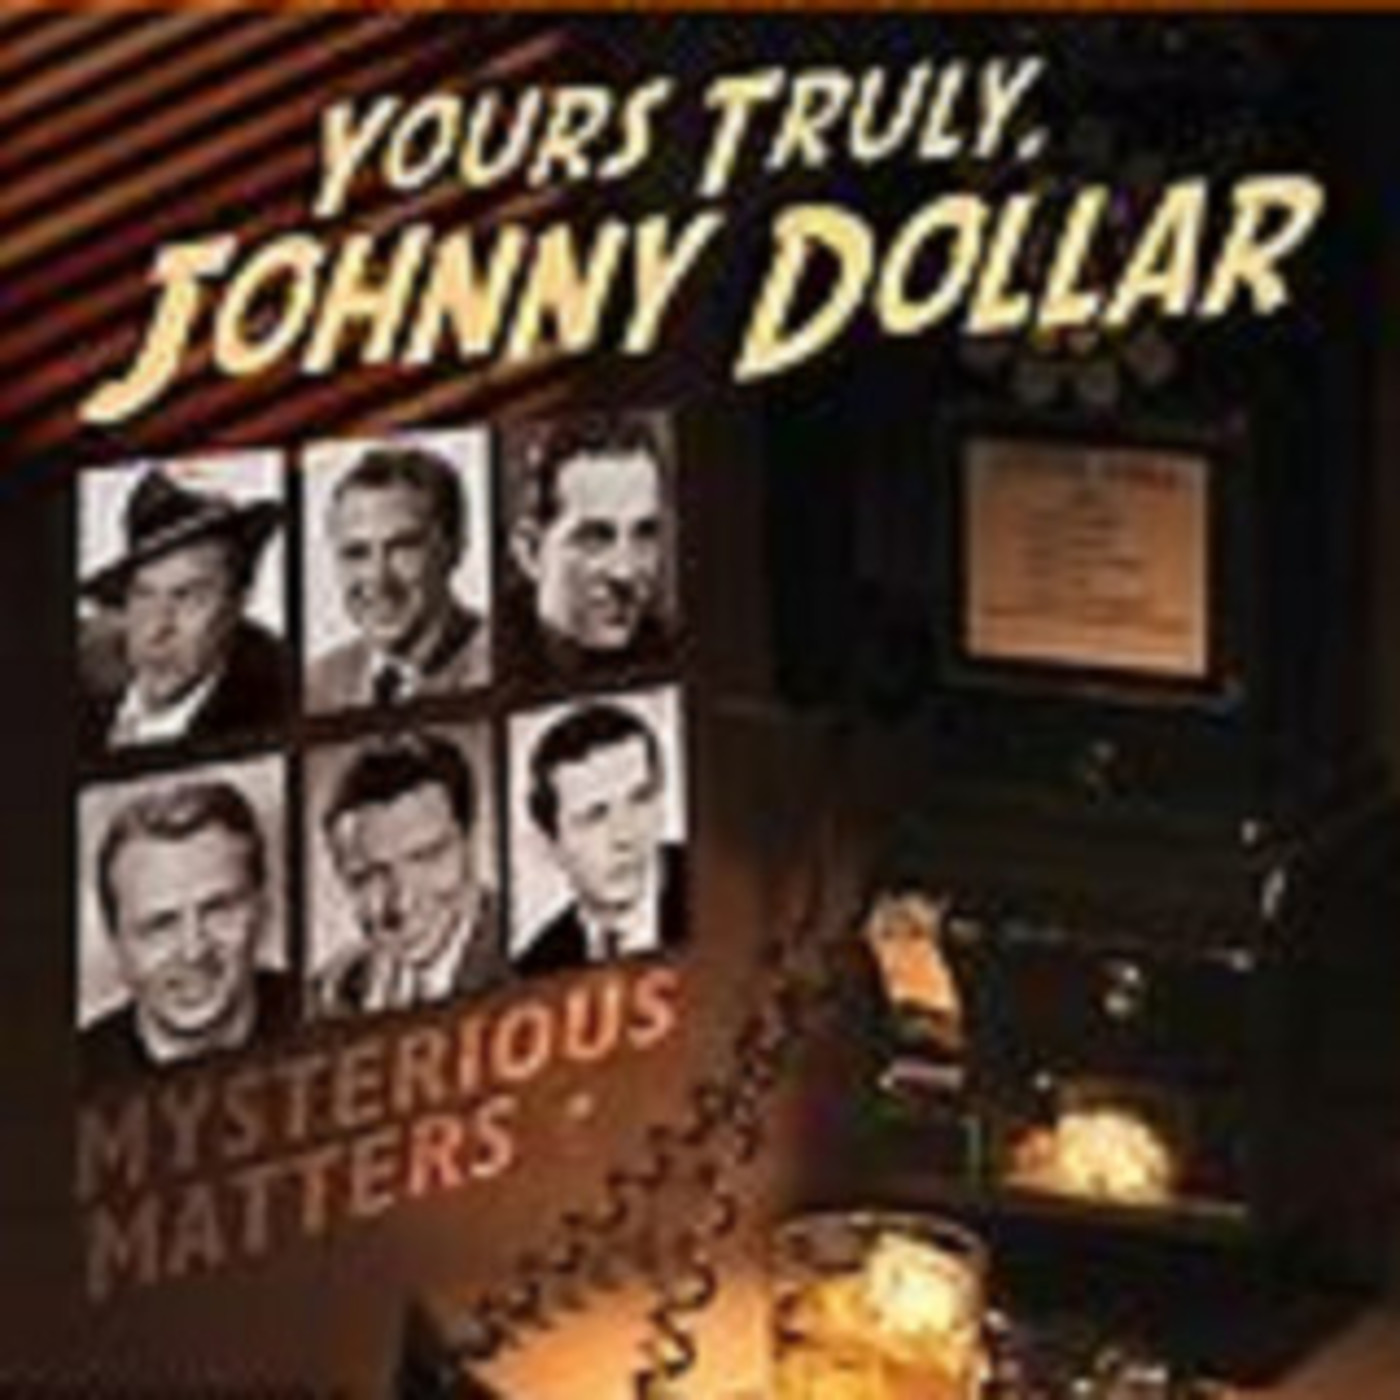 Yours Truly, Johnny Dollar - 091860, episode 706 - The Real Smokey Matter